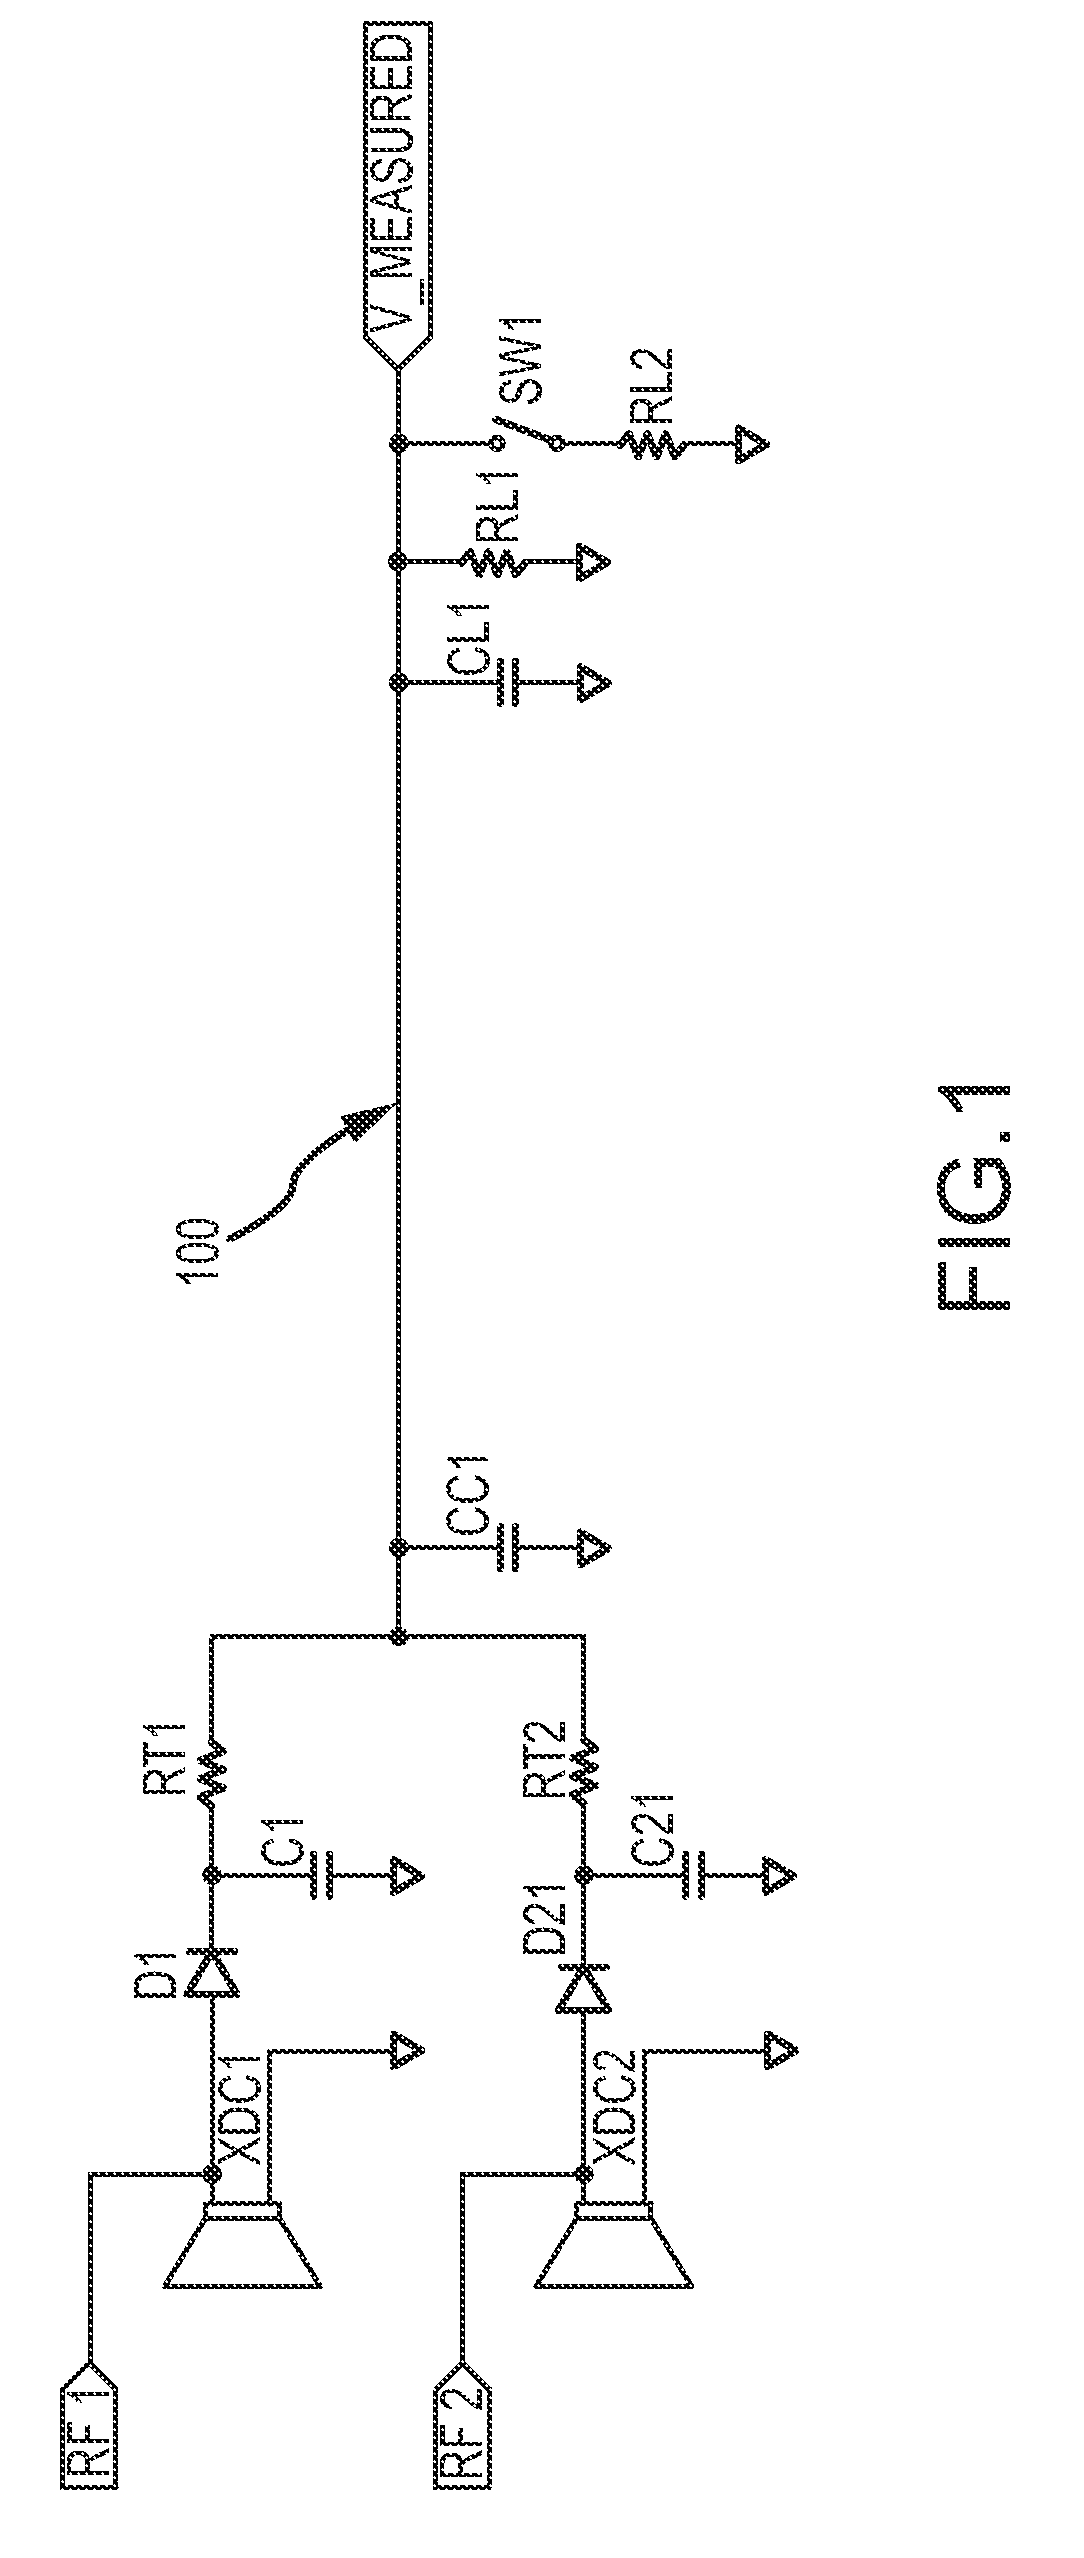 Method and system for using common subchannel to assess the operating characteristics of transducers